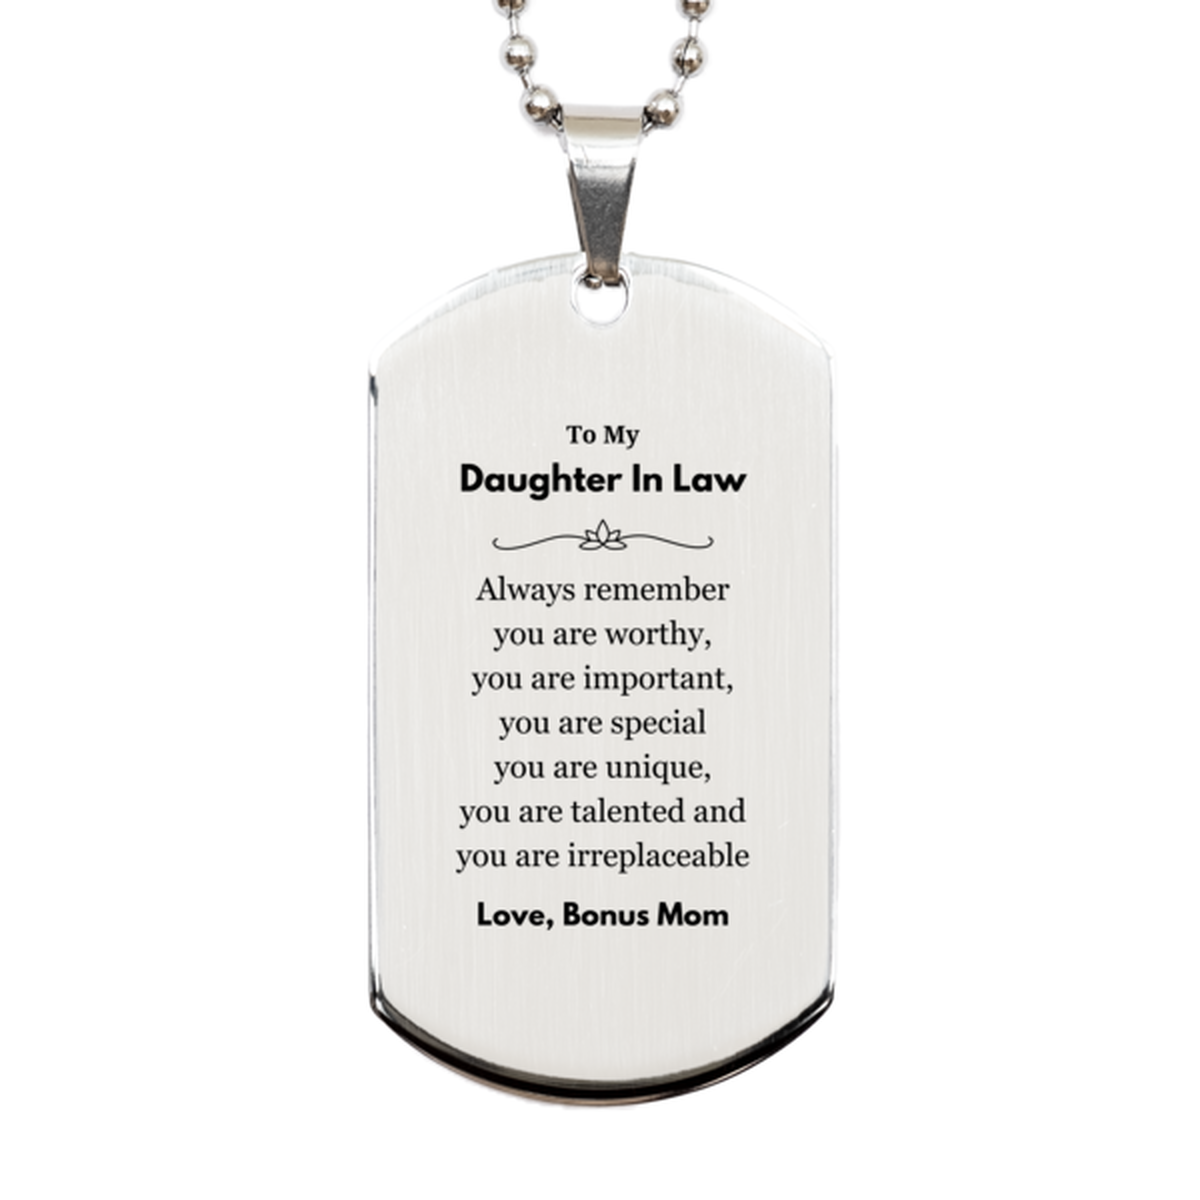 Daughter In Law Birthday Gifts from Bonus Mom, Inspirational Silver Dog Tag for Daughter In Law Christmas Graduation Gifts for Daughter In Law Always remember you are worthy, you are important. Love, Bonus Mom